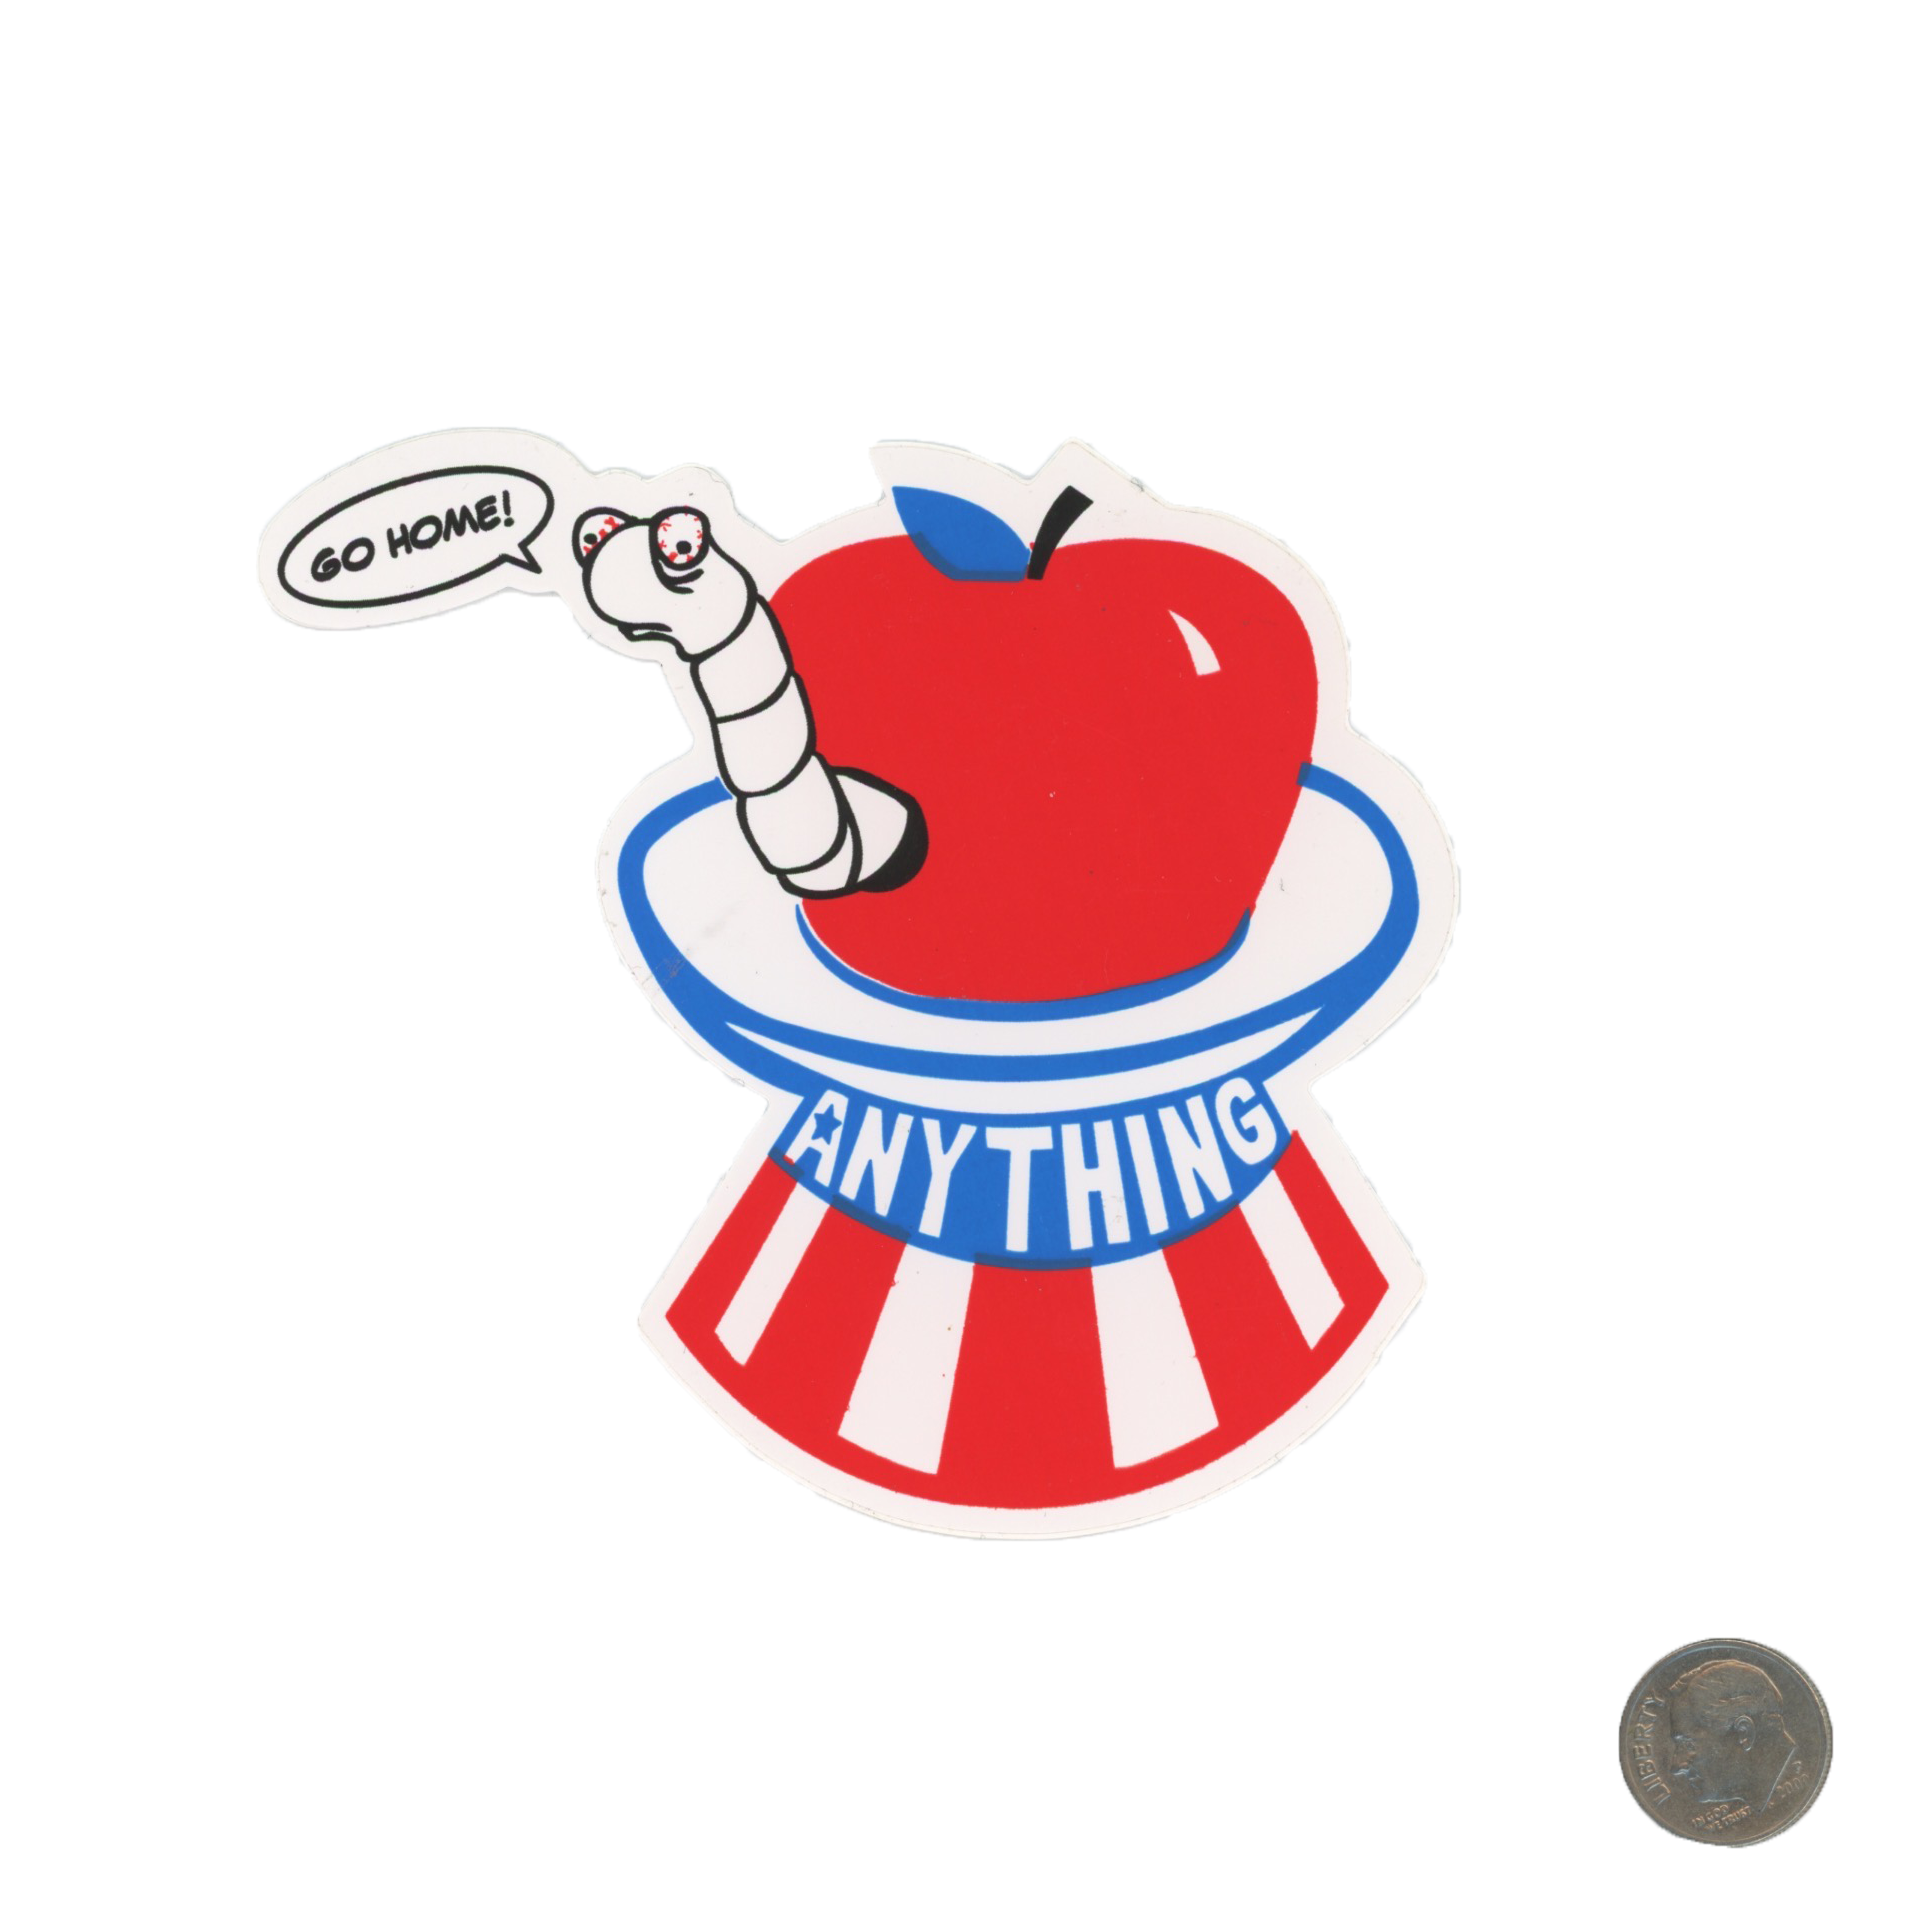 A NY Thing Go Home Worm in Apple Sticker with dime